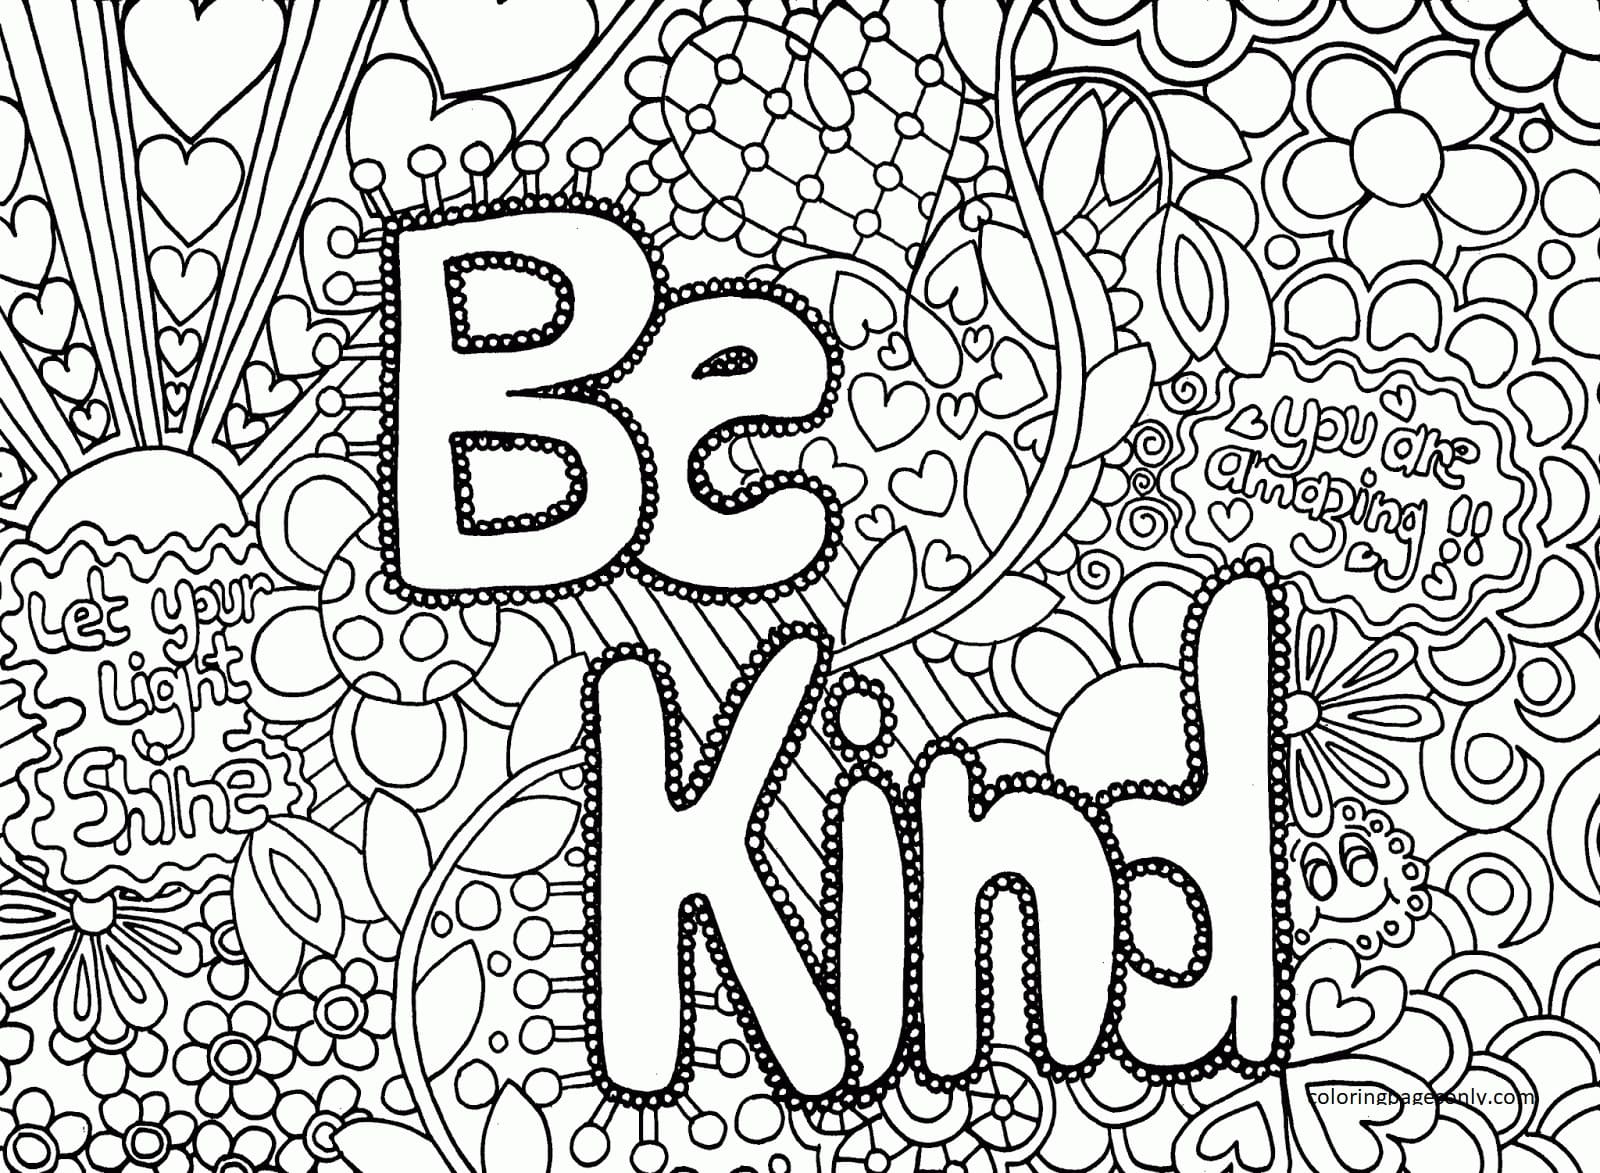 Be Kind from Teenage